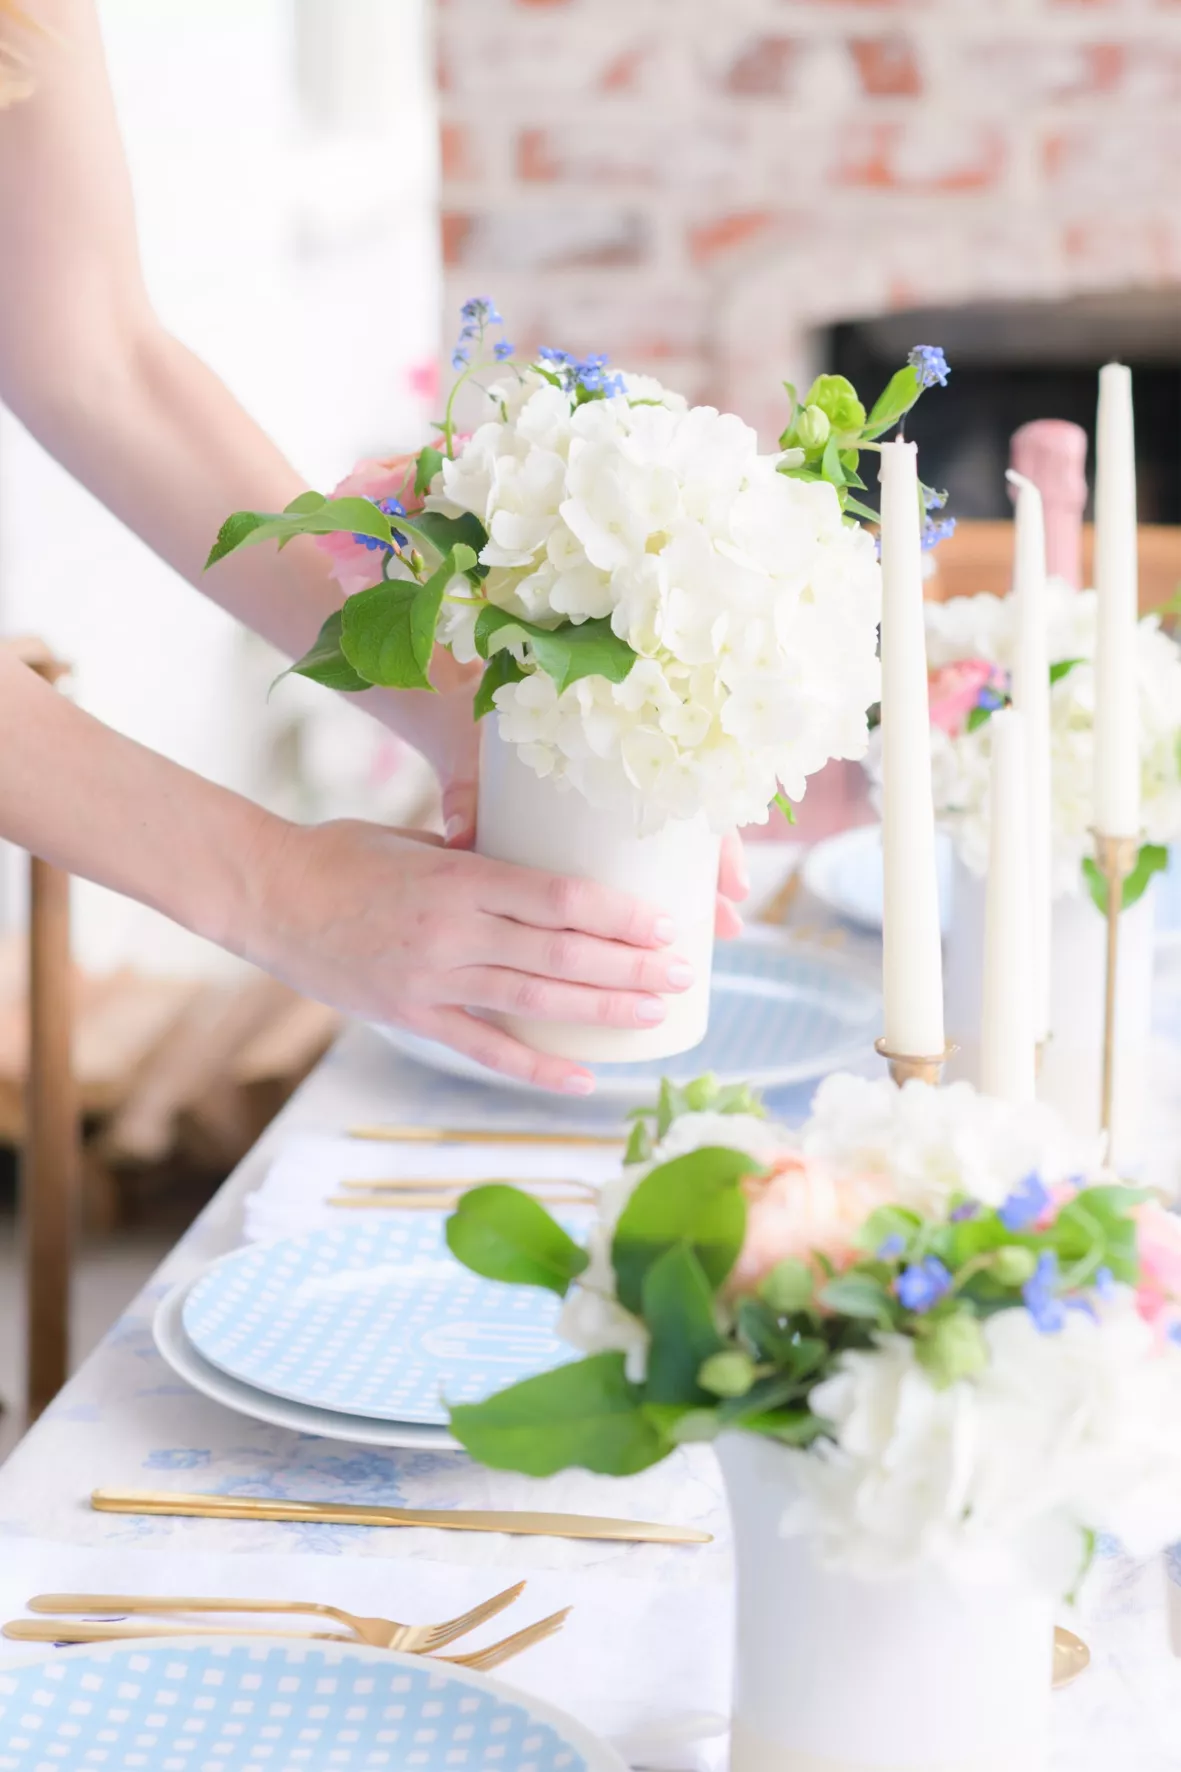 20 gorgeous Easter table decorations